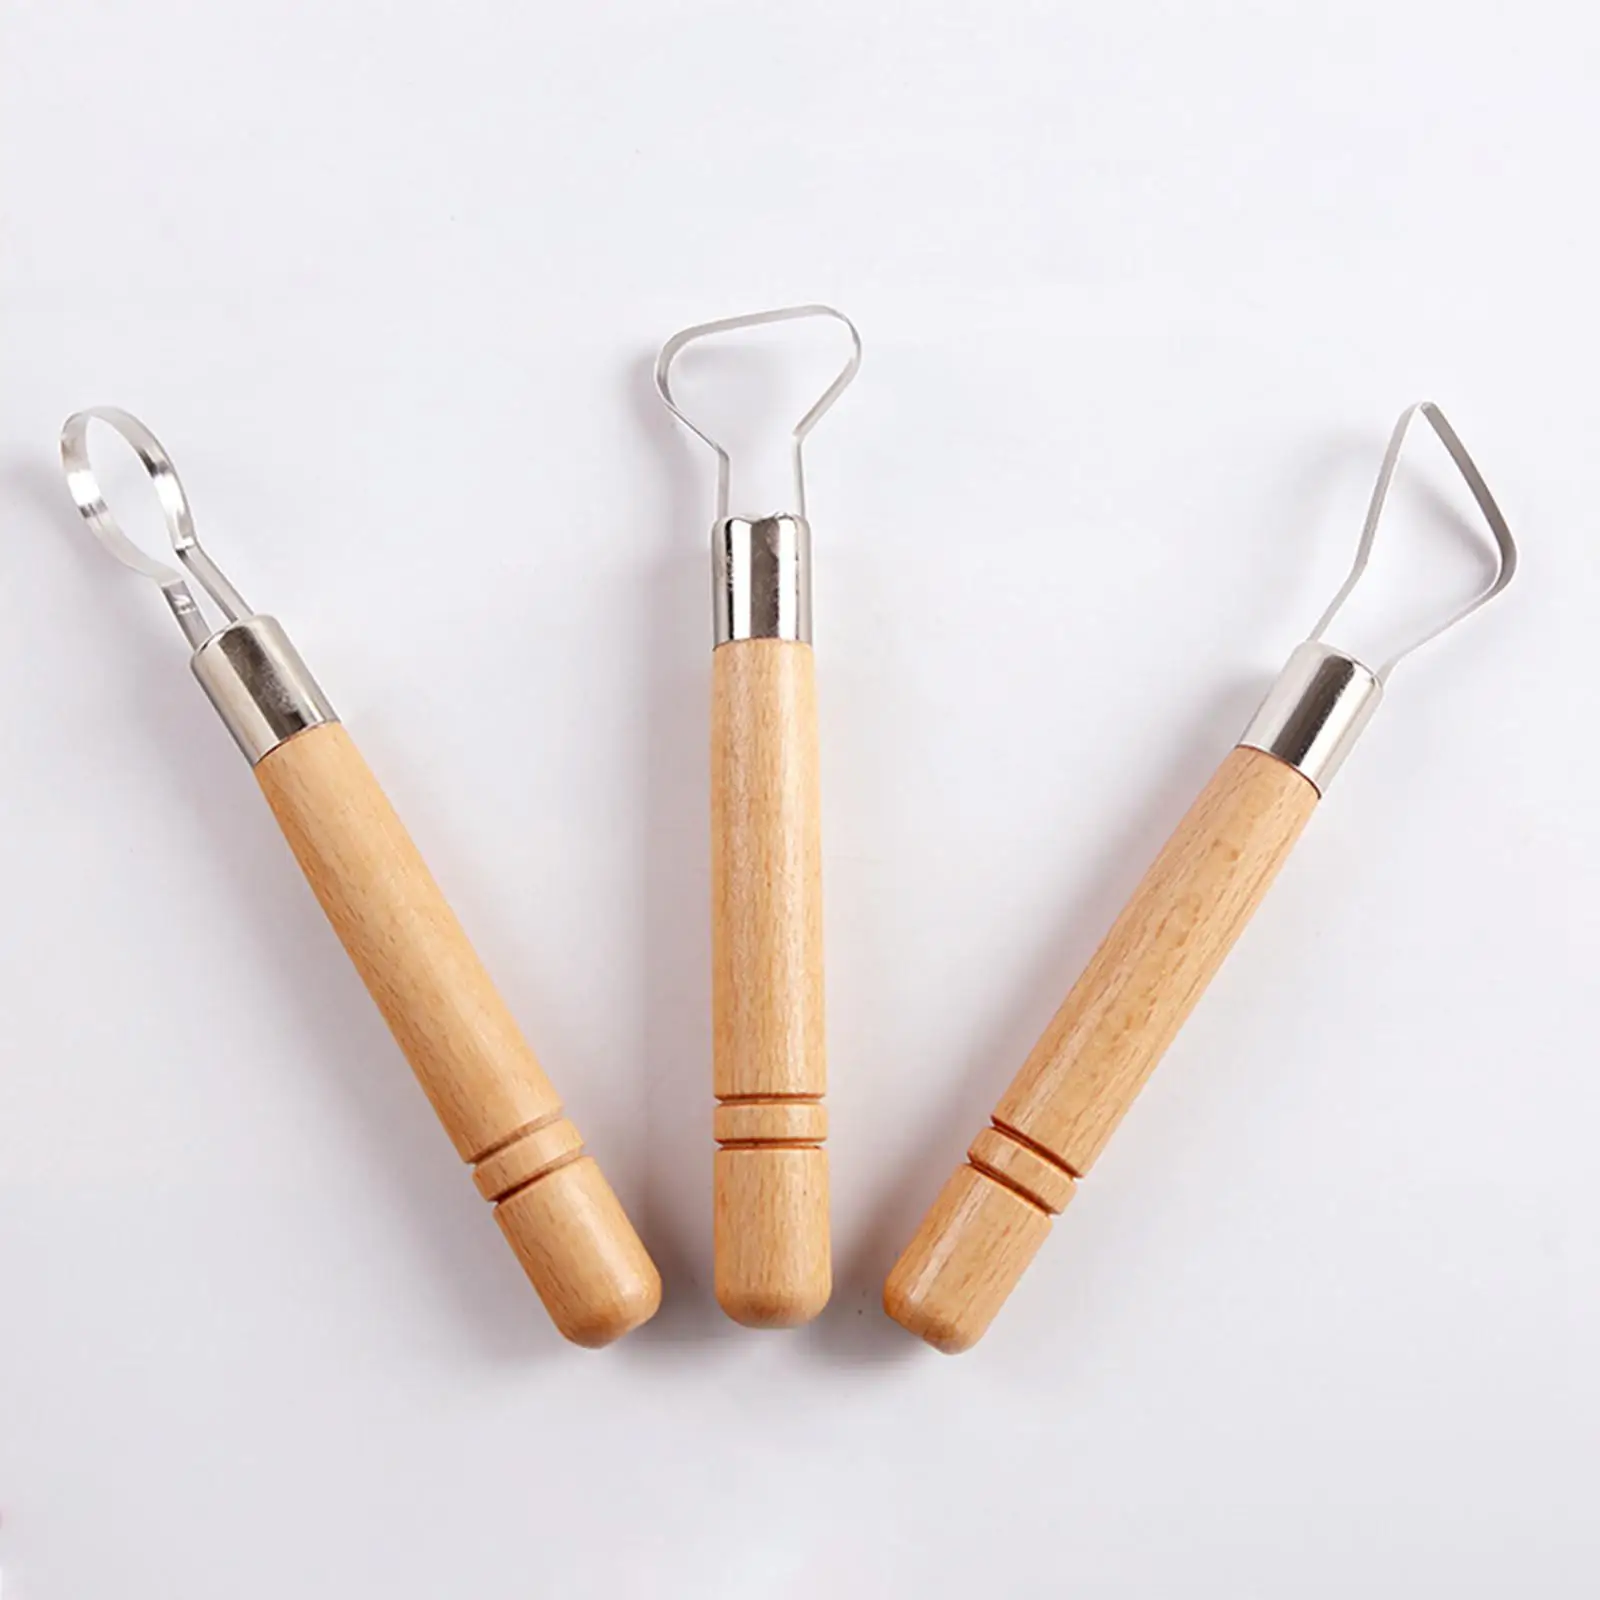 3x Clay Pottery   Craft  Modeling Trimming Loop Repairing Texture Tools for Artists